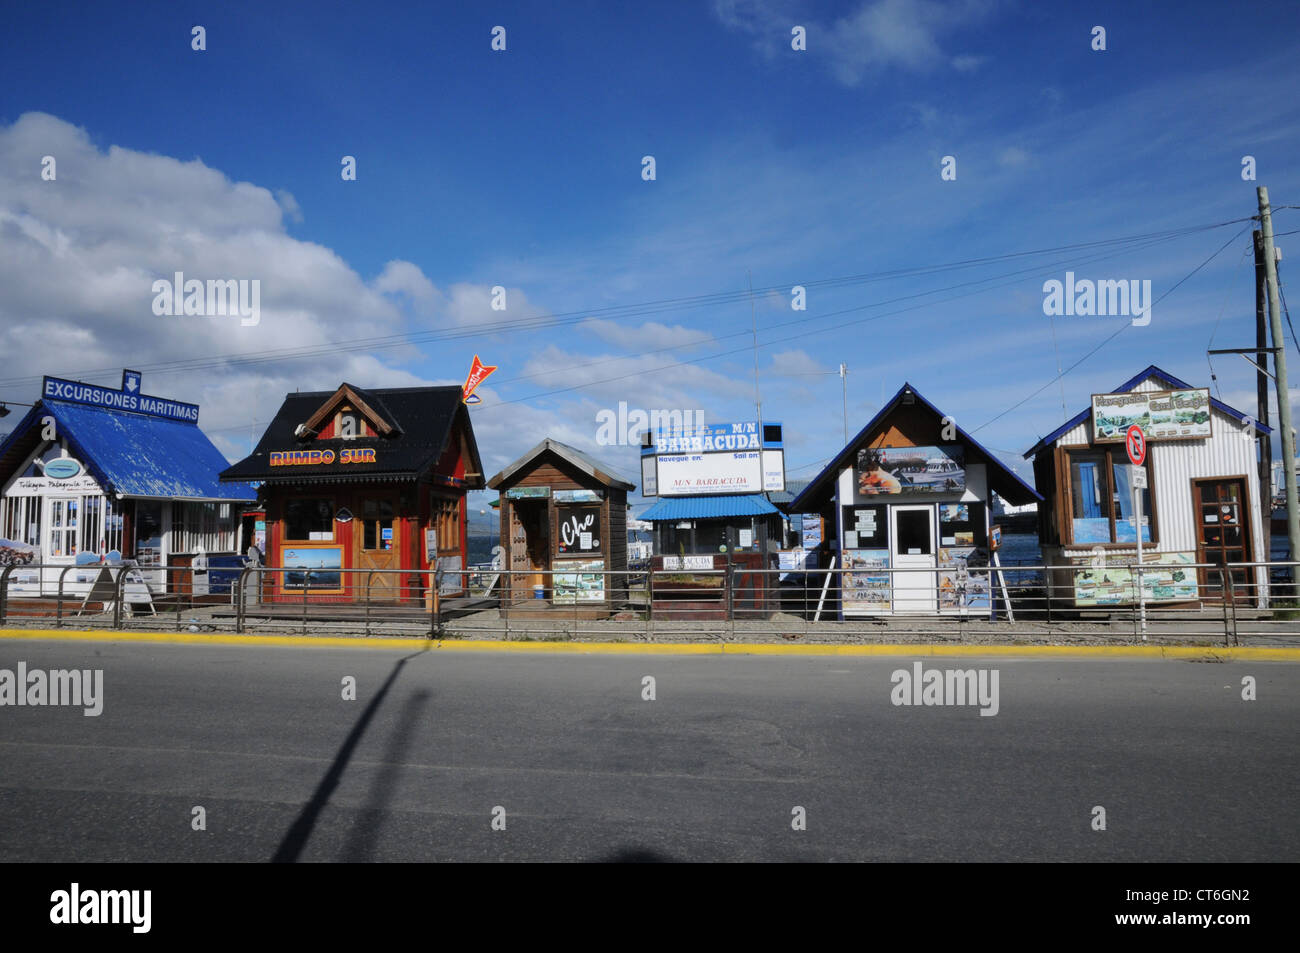 Seaside huts selling tours, trips and excursions by boat, dockside, Ushuaia, Argentina. Stock Photo